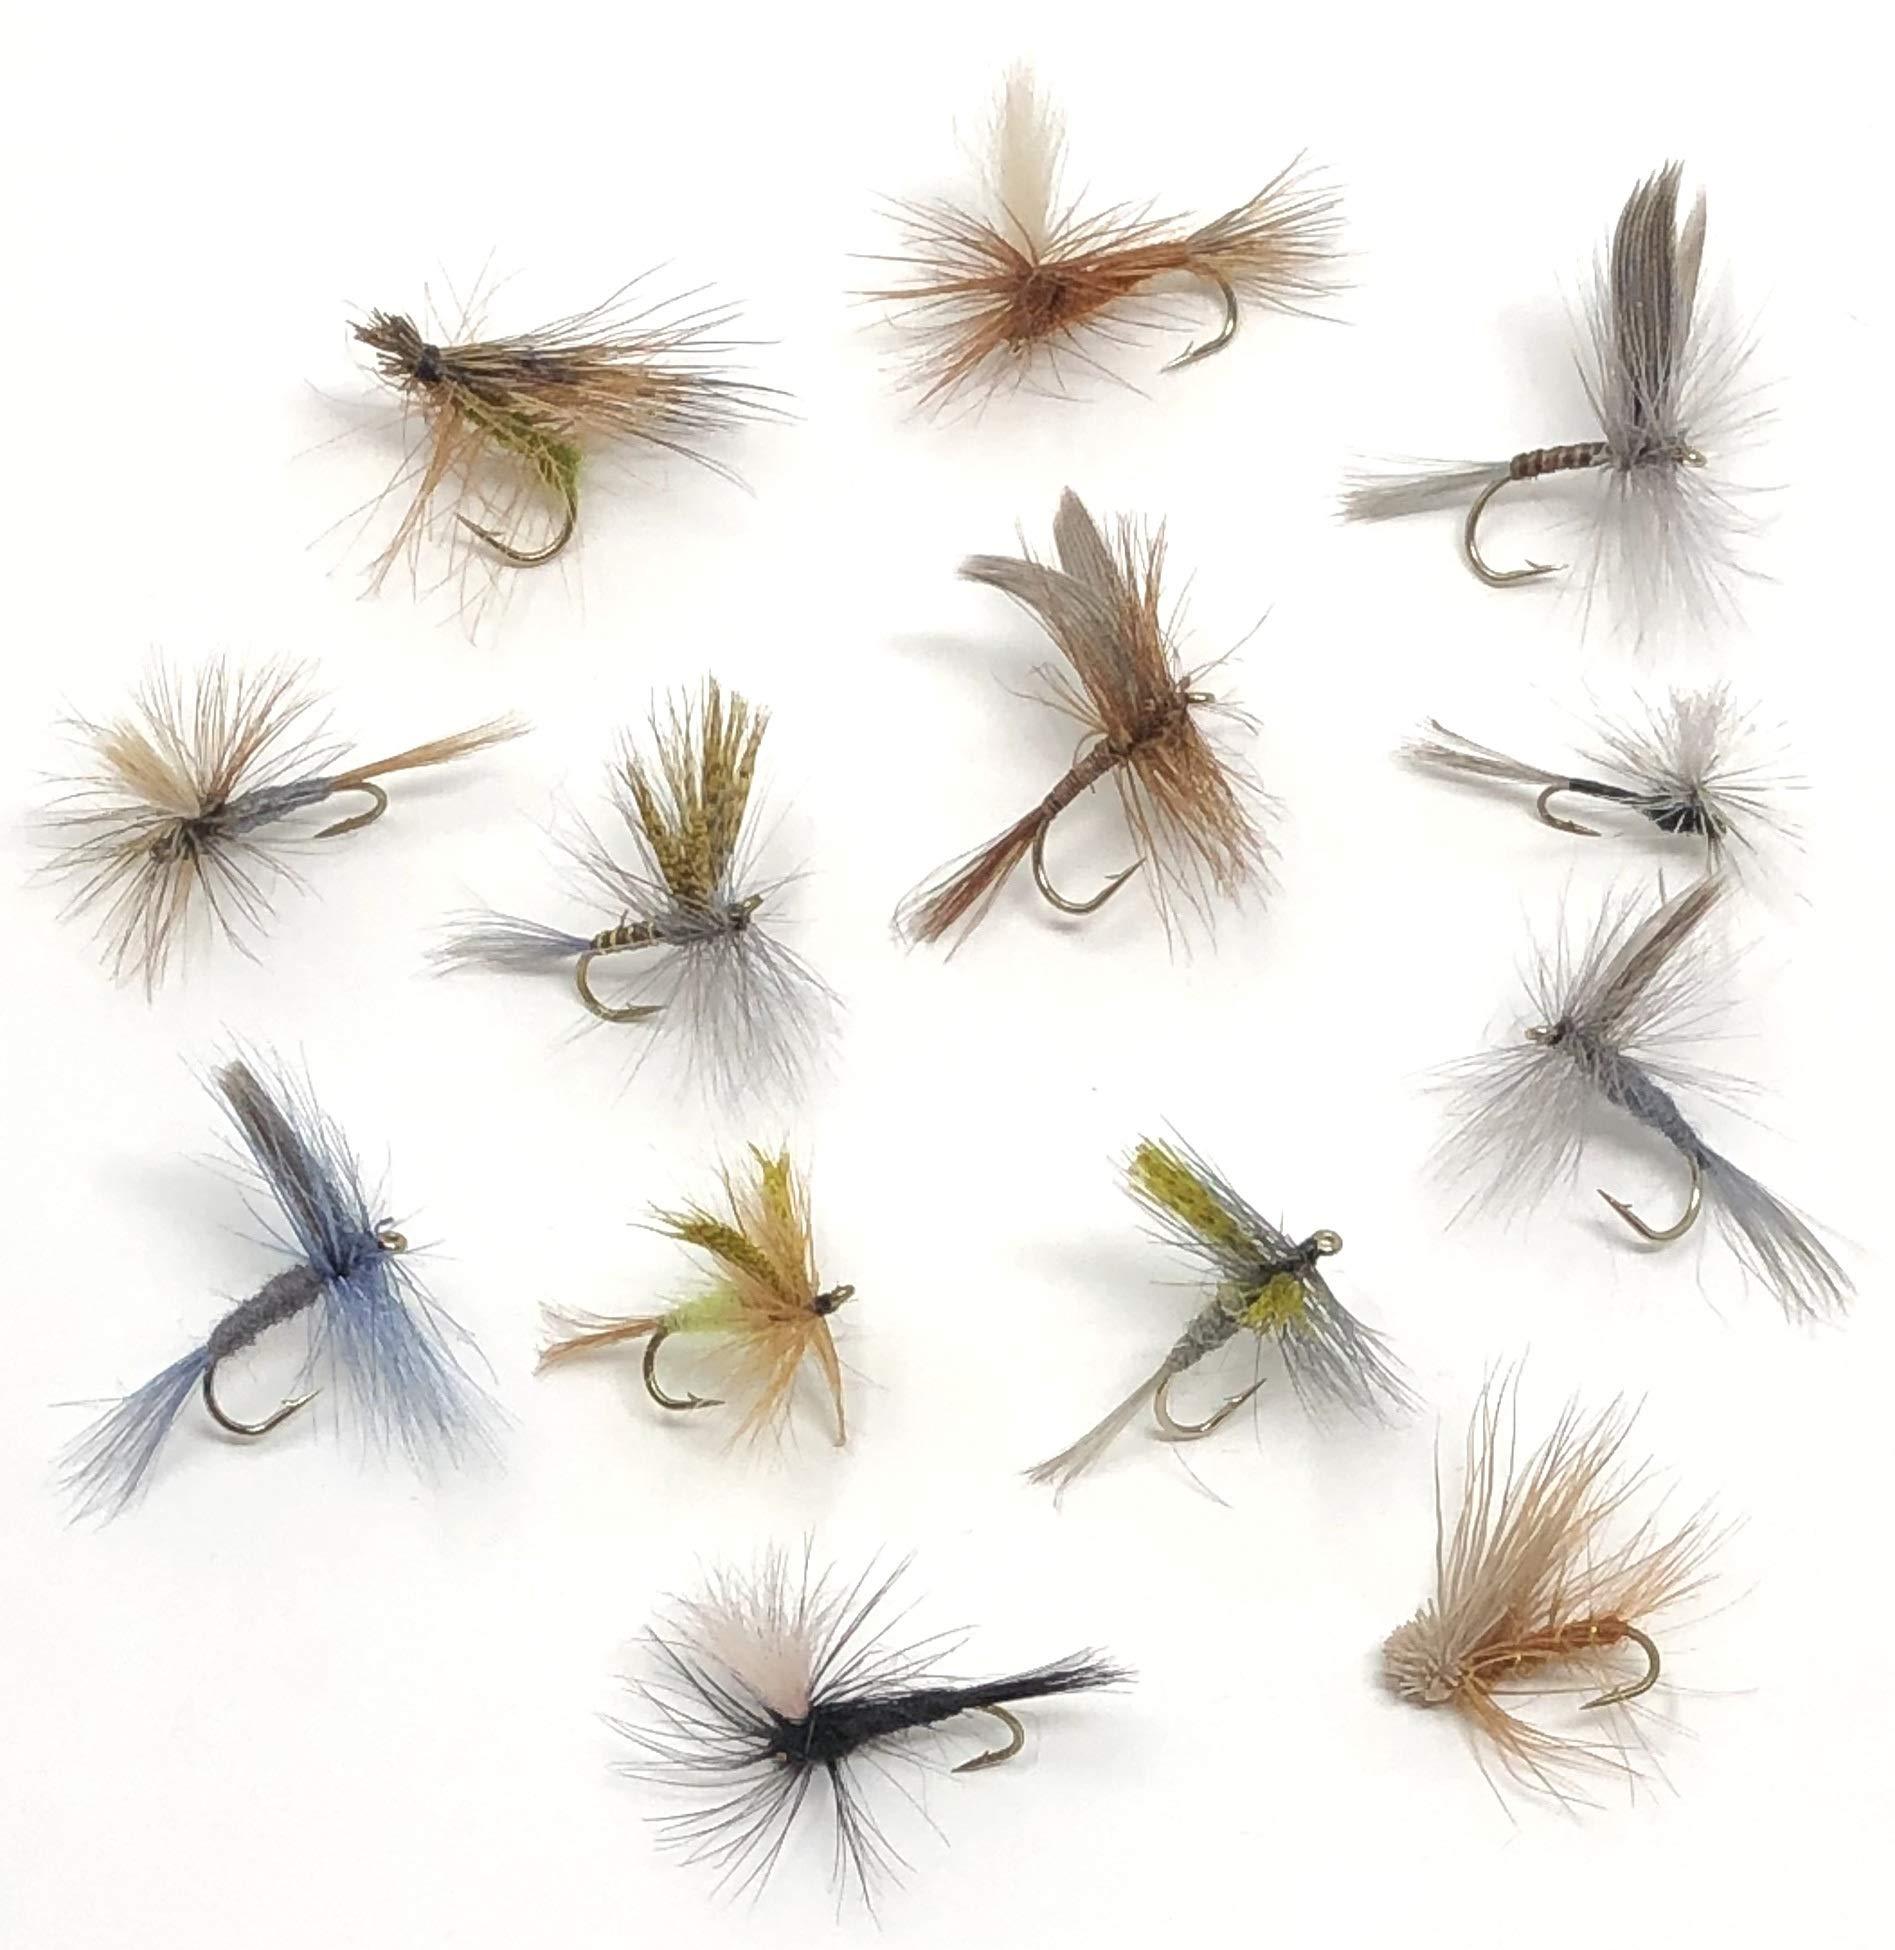  Feeder Creek Squirmy Wormy, 12pc Fly Fishing Lures with Bead  Head, Size 12, Ideal for Trout, Bass, Steelhead, Salmon and Other  Freshwater Fish (Brown) : Sports & Outdoors